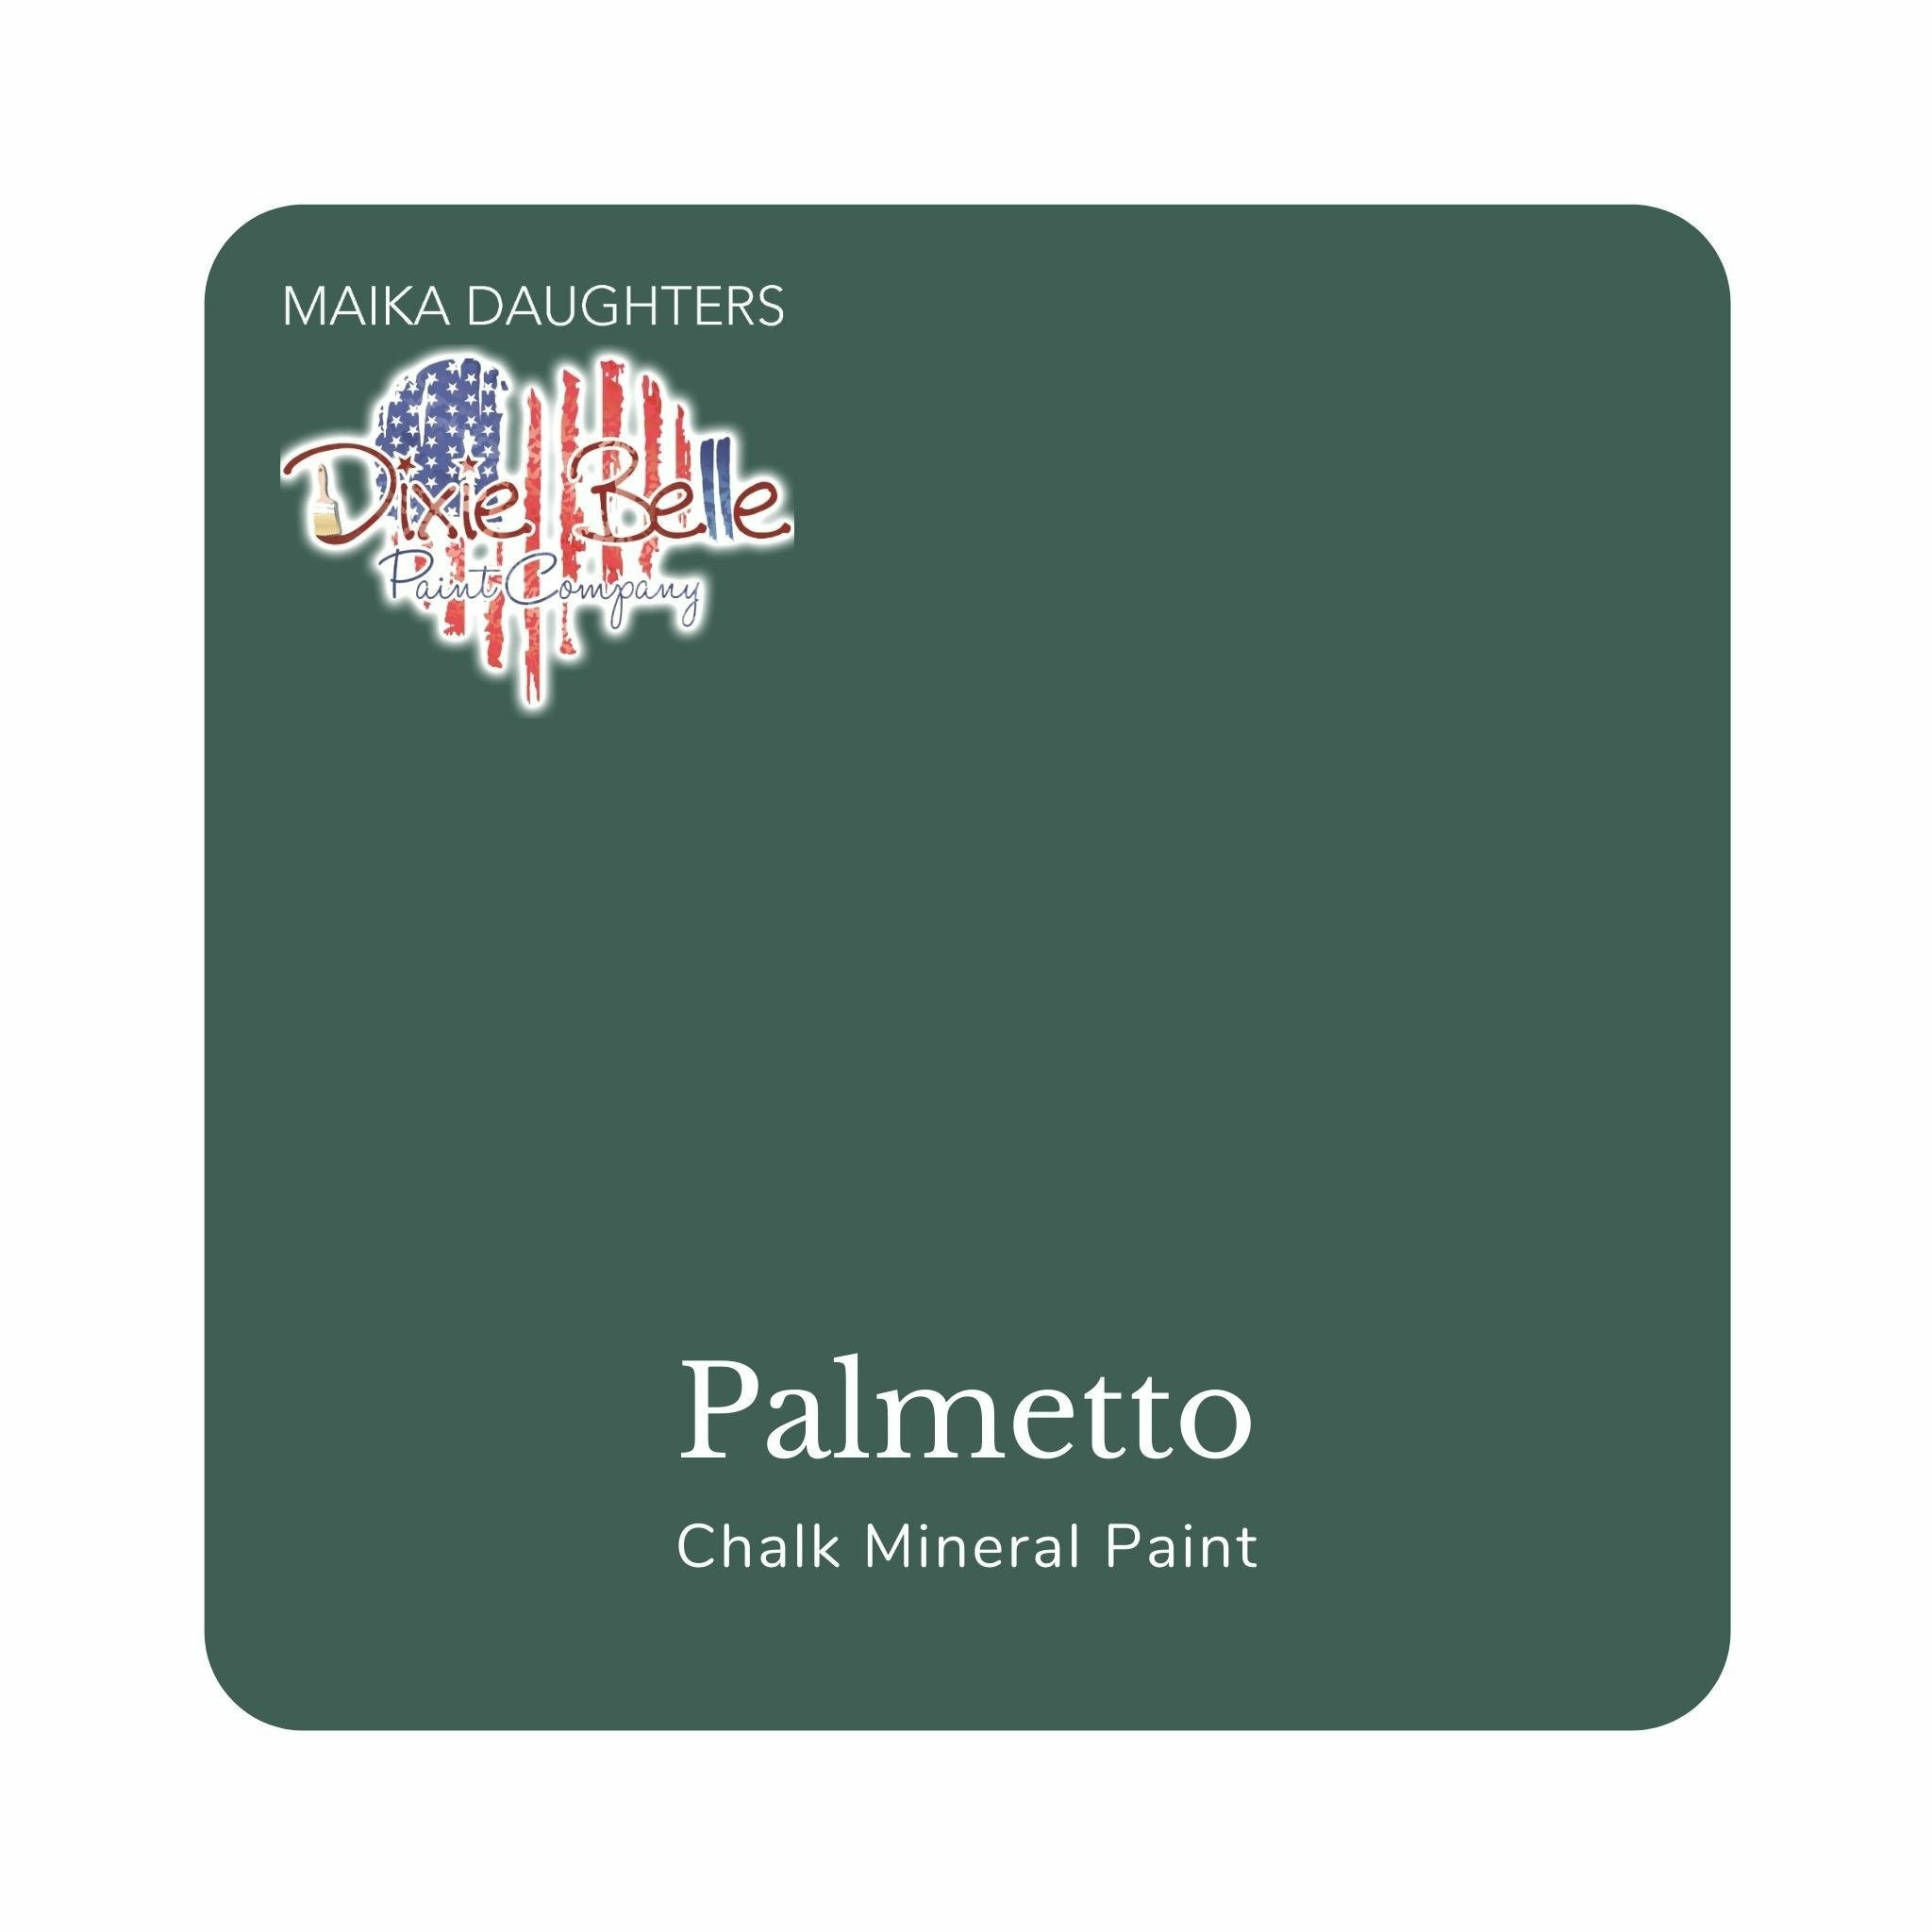 A square swatch card of Dixie Belle Paint Company’s Palmetto Chalk Mineral Paint is against a white background. This color is a subdued green with a cyan undertone.